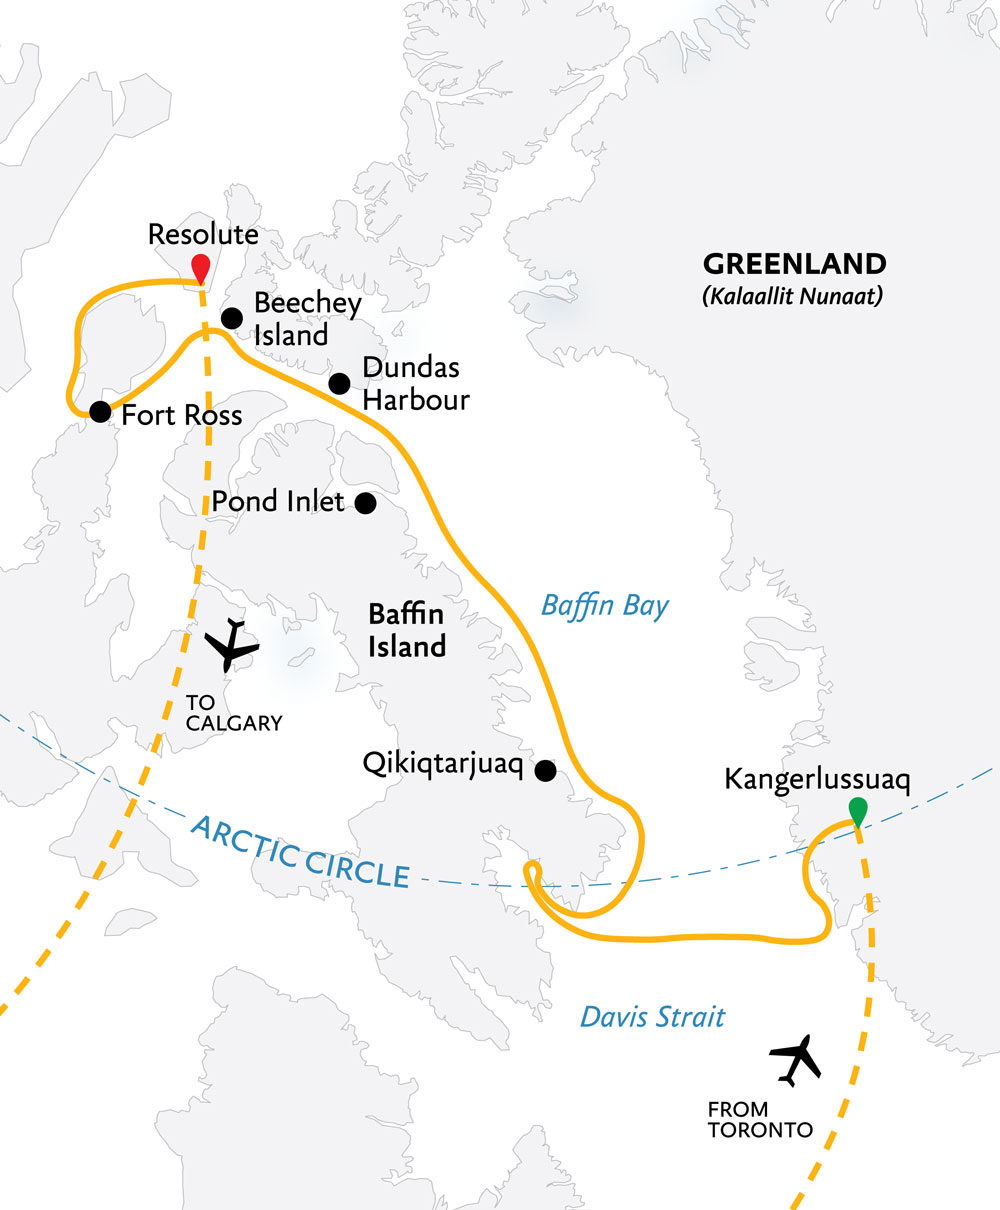 Route map of the Northwest Passage: The Legendary Arctic Sea Route cruise, operating via charter flights from Toronto and to Calgary, with embarkation in Kangerlussuaq, Greenland, and disembarkation in Resolute, Canada, and visits along eastern Baffin Island.